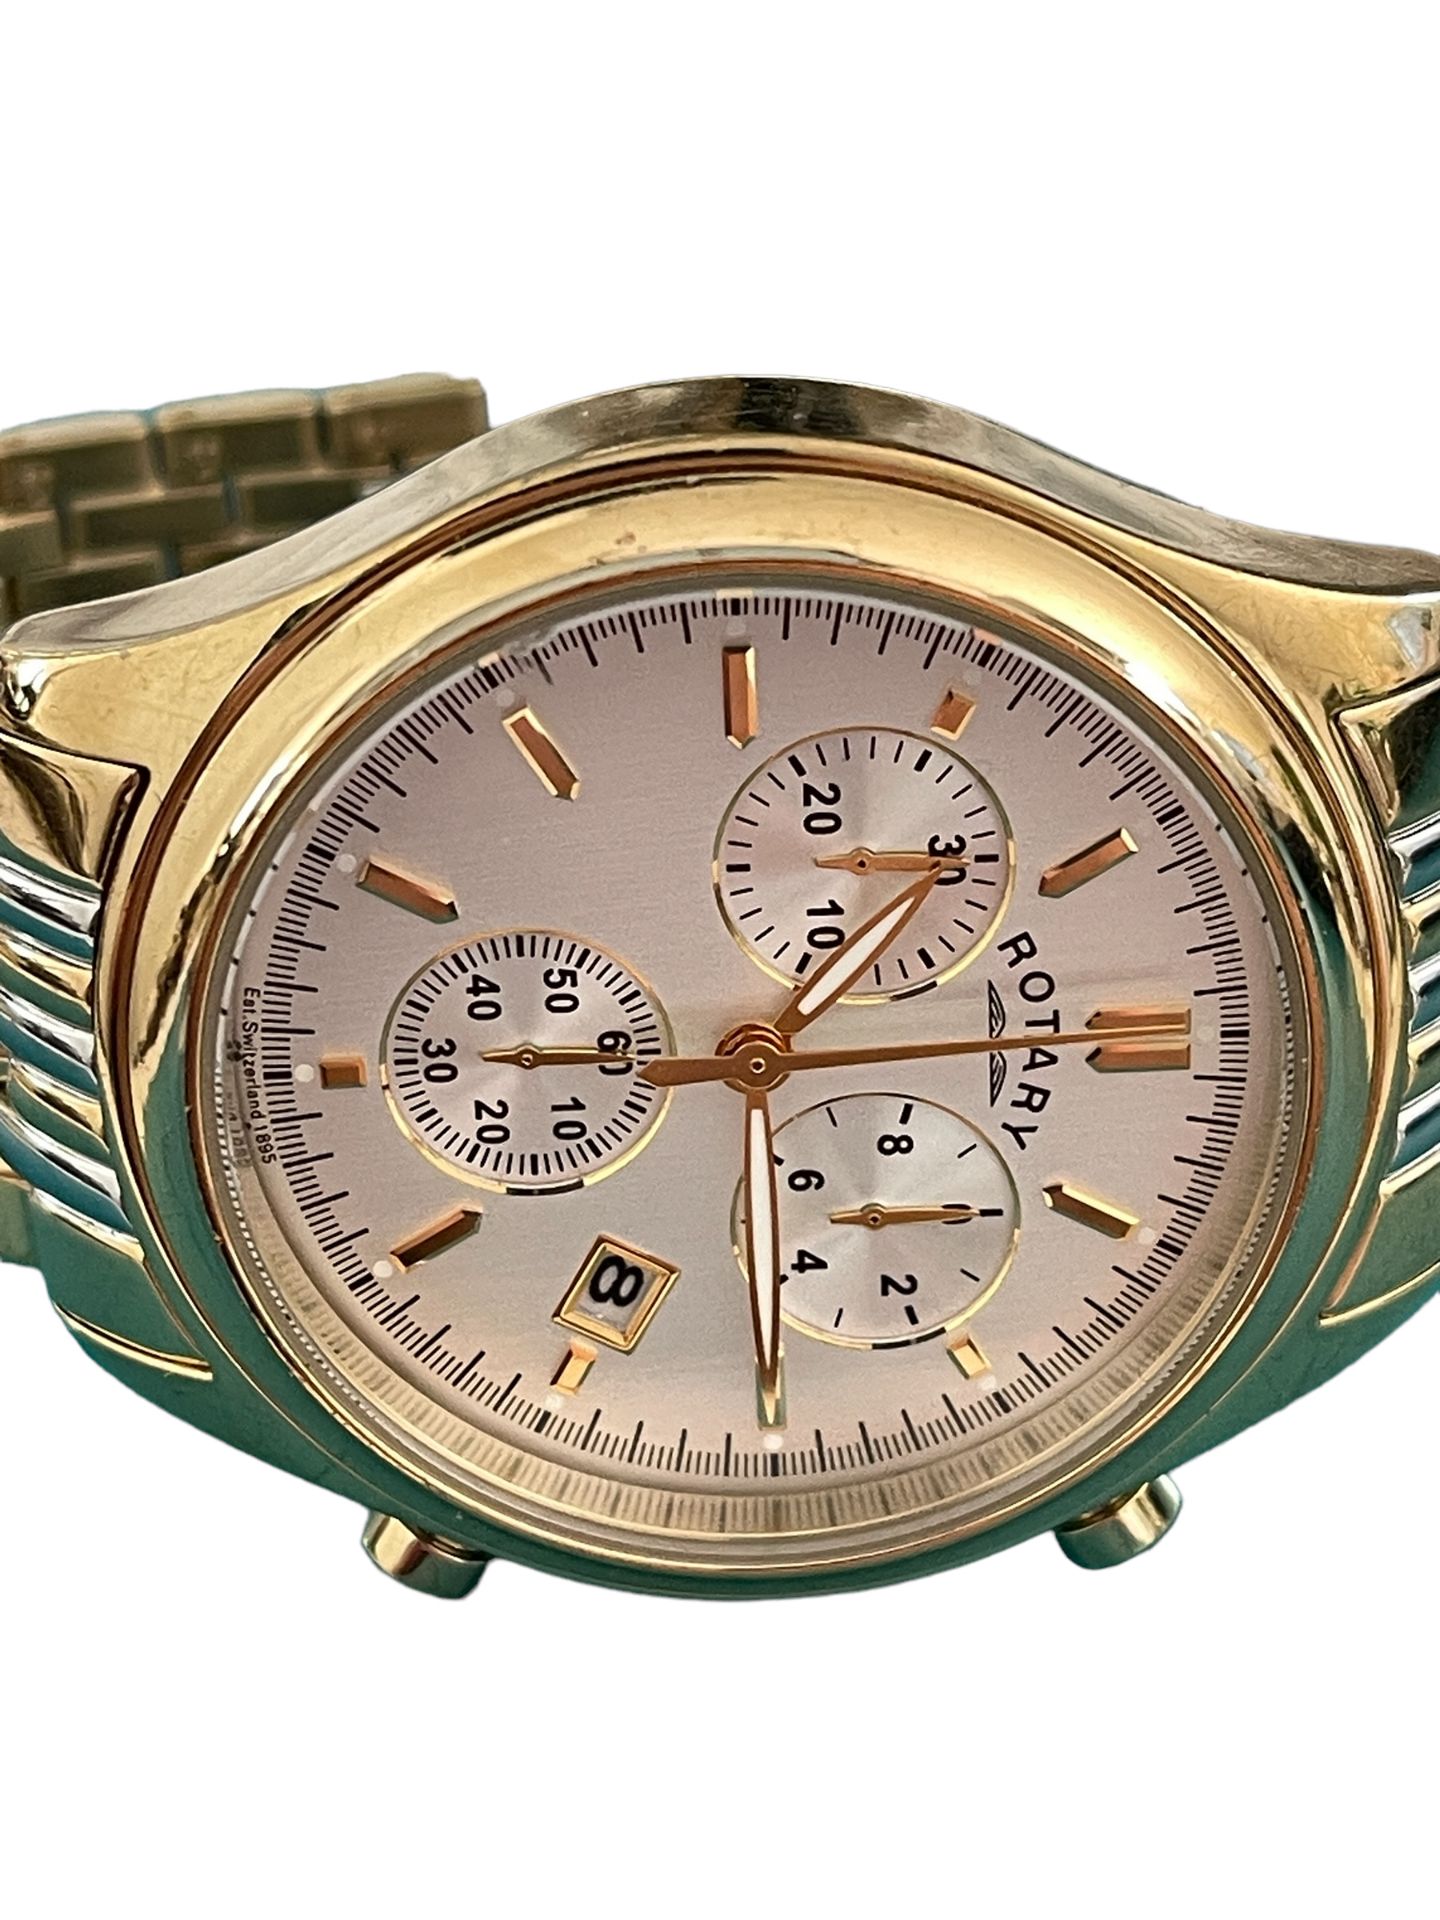 Men's' Rotary Chronograph Watch - Image 6 of 6